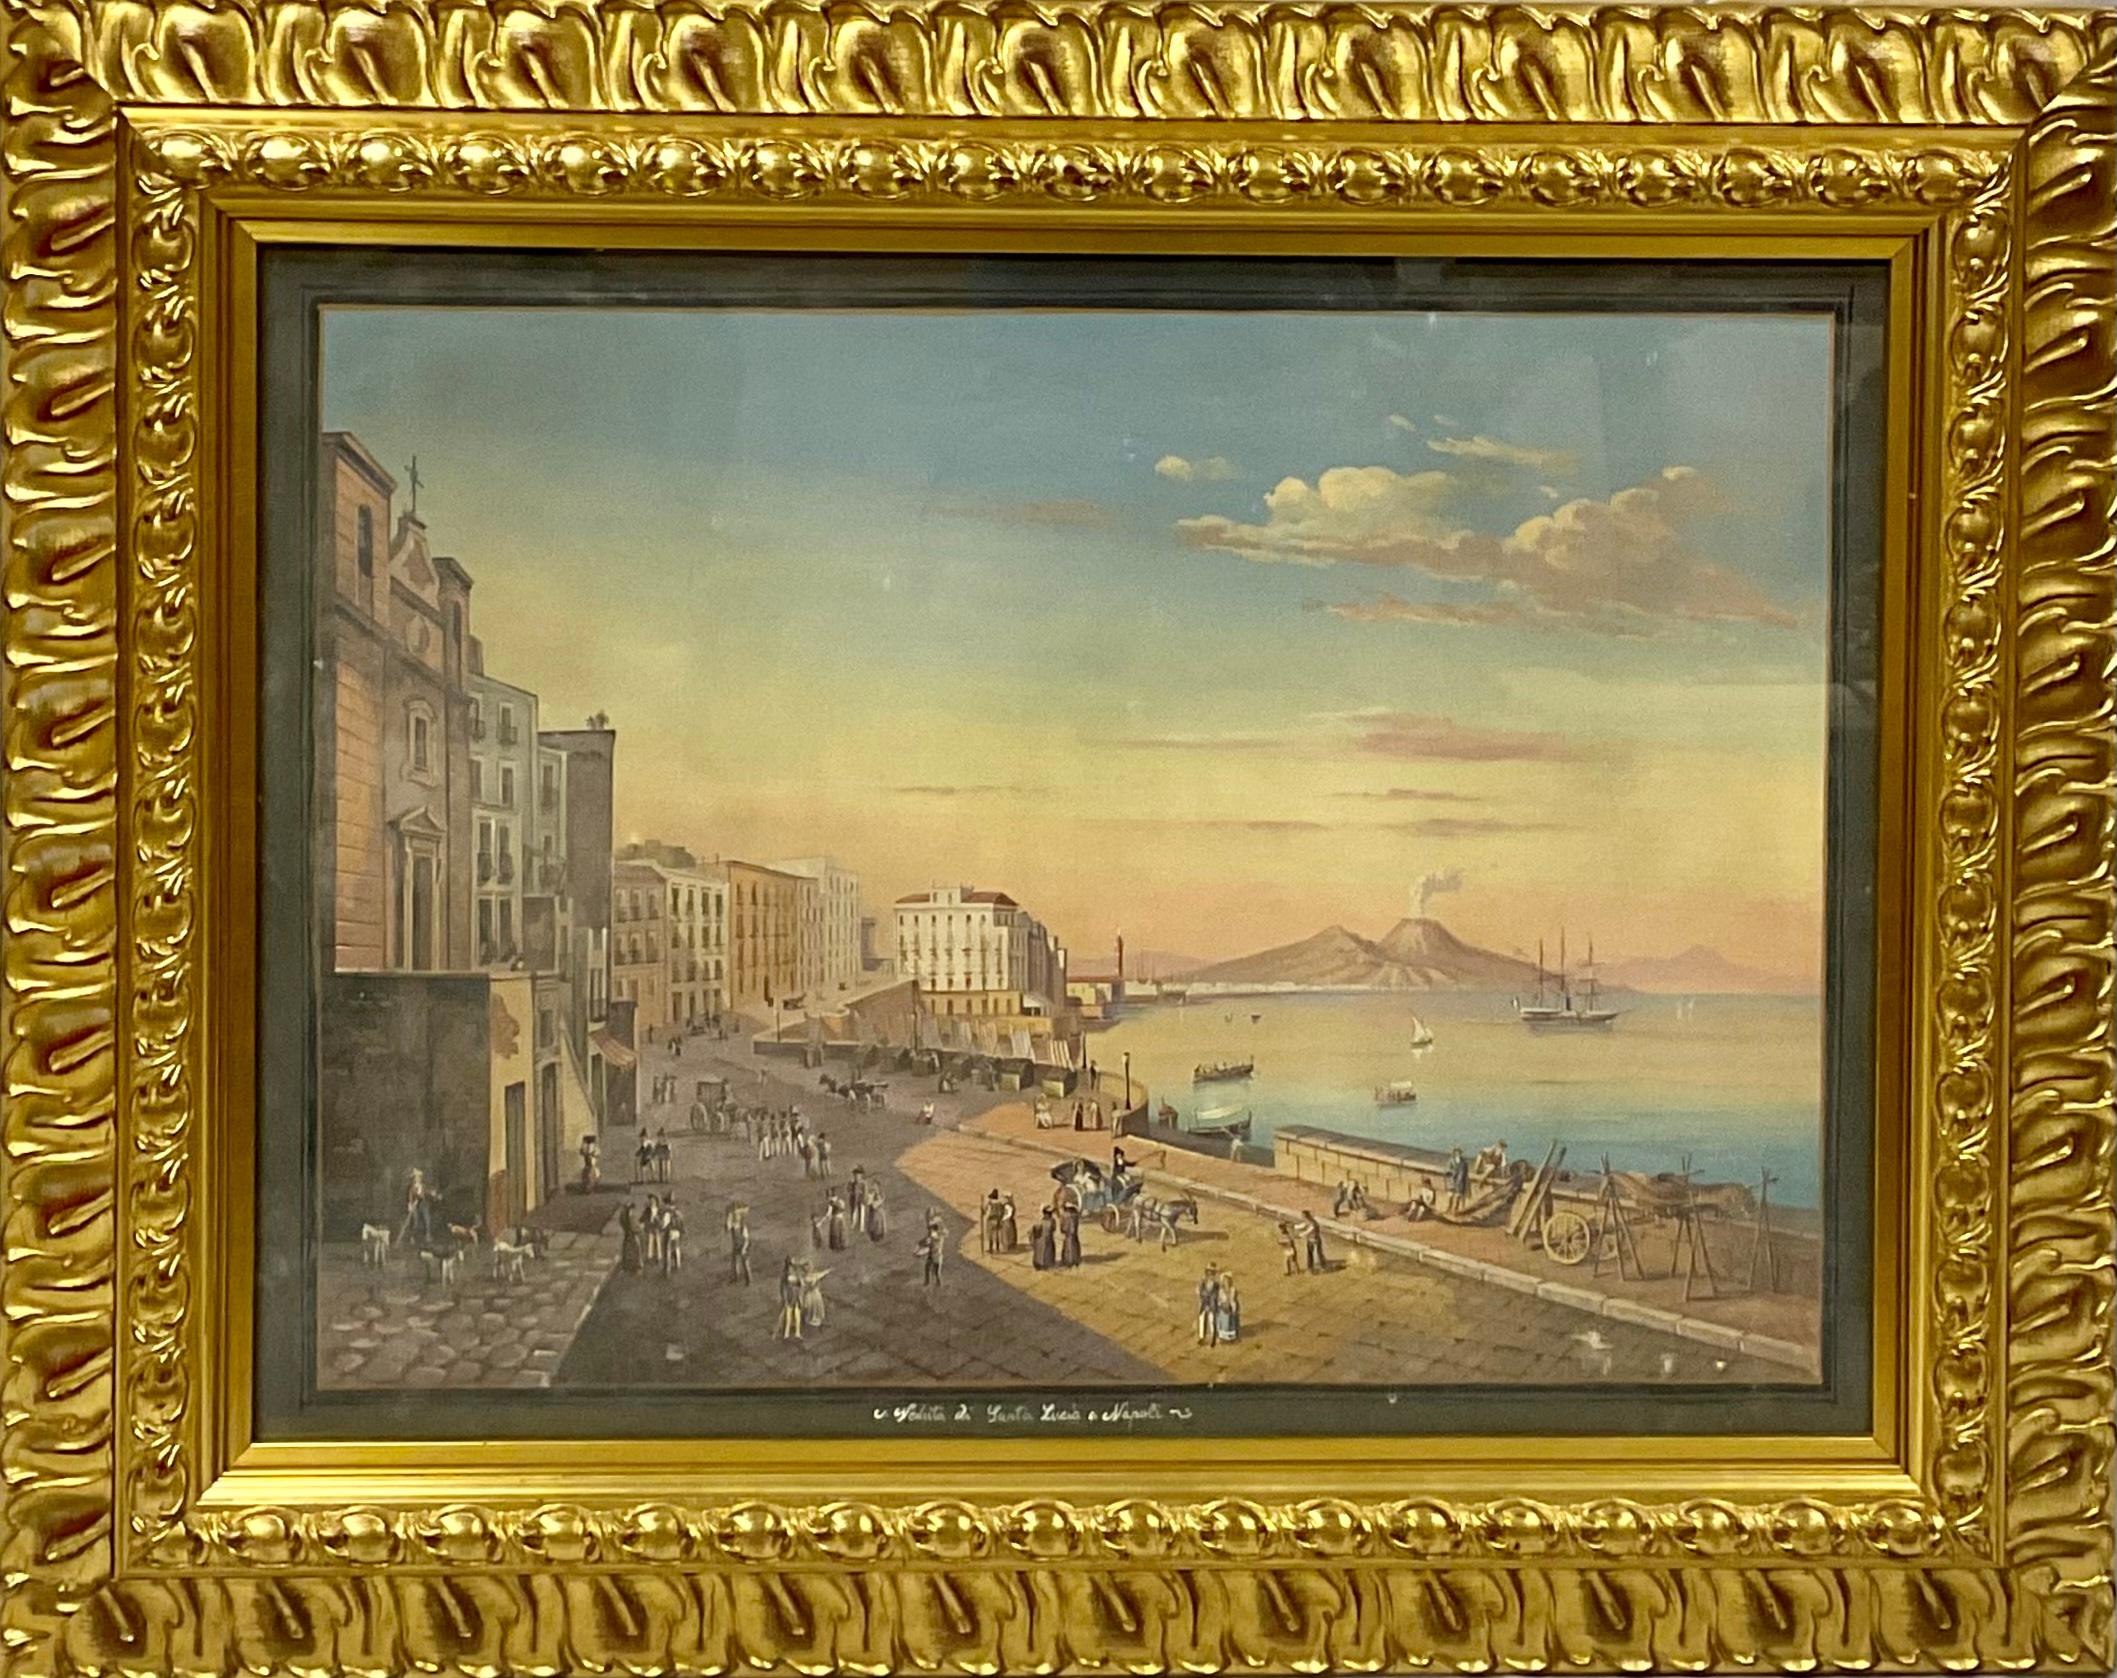 An absolutely exquisite pair of Italian 19th century Neapolitan gouaches in 20th century giltwood frames. One depicts the volcano eruption of 1822 in Naples, the other is an affluent residential area, in southern Italy, on the coast of the gulf of